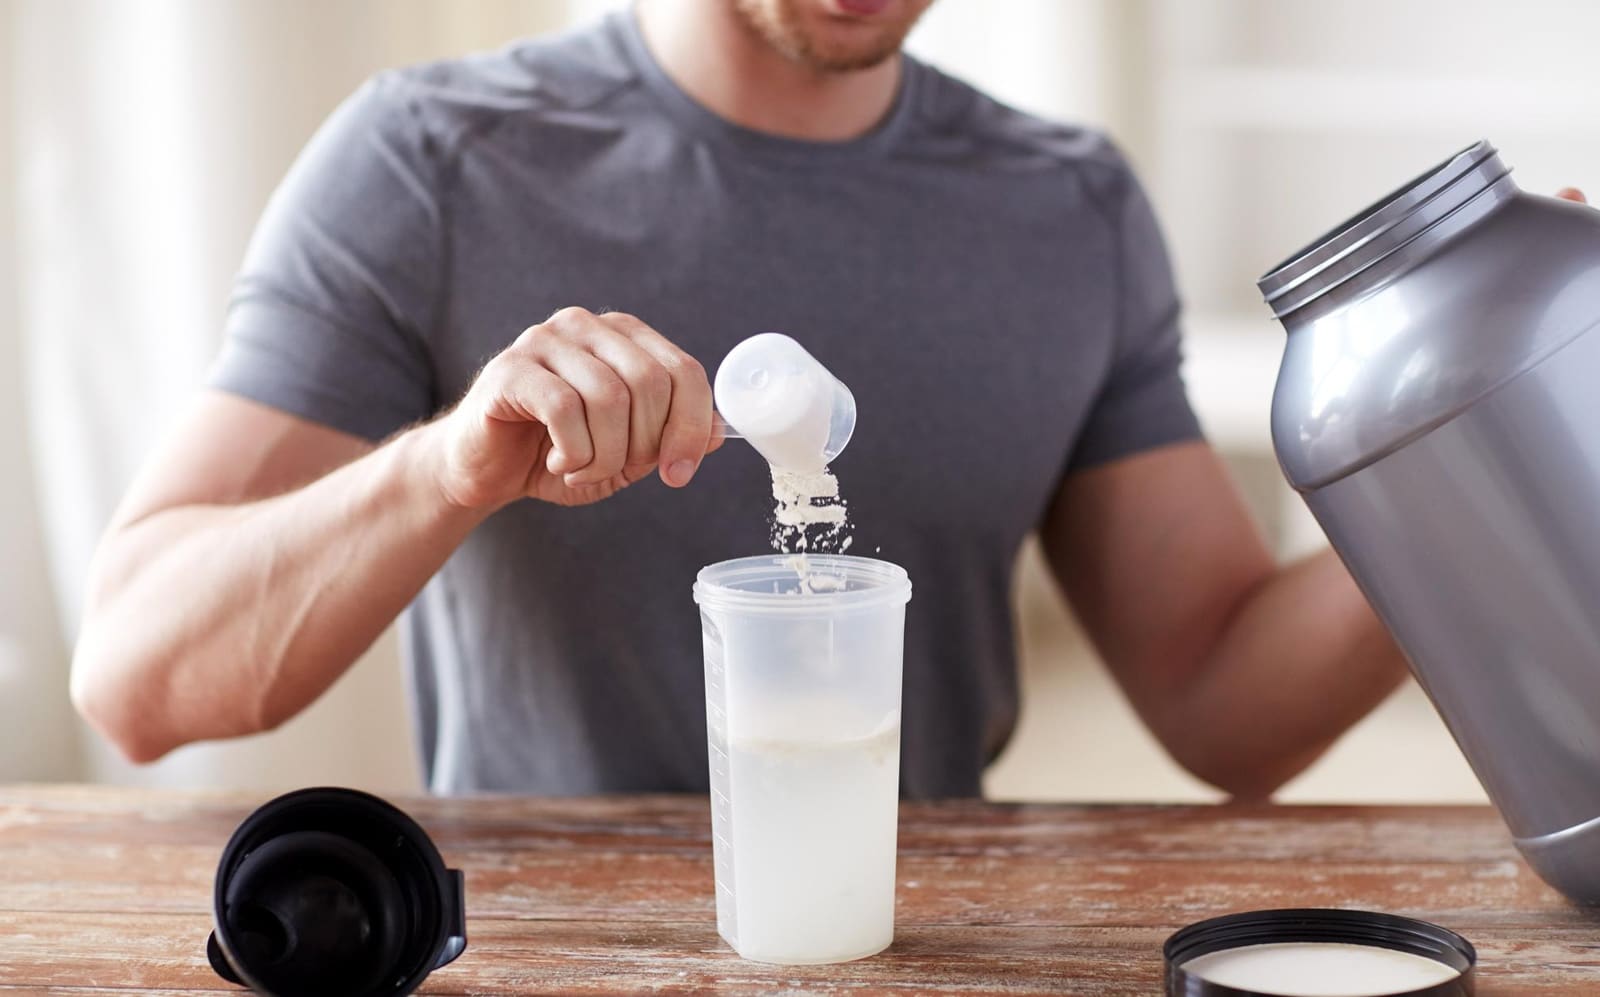 What is the difference between mixing protein powder in water or